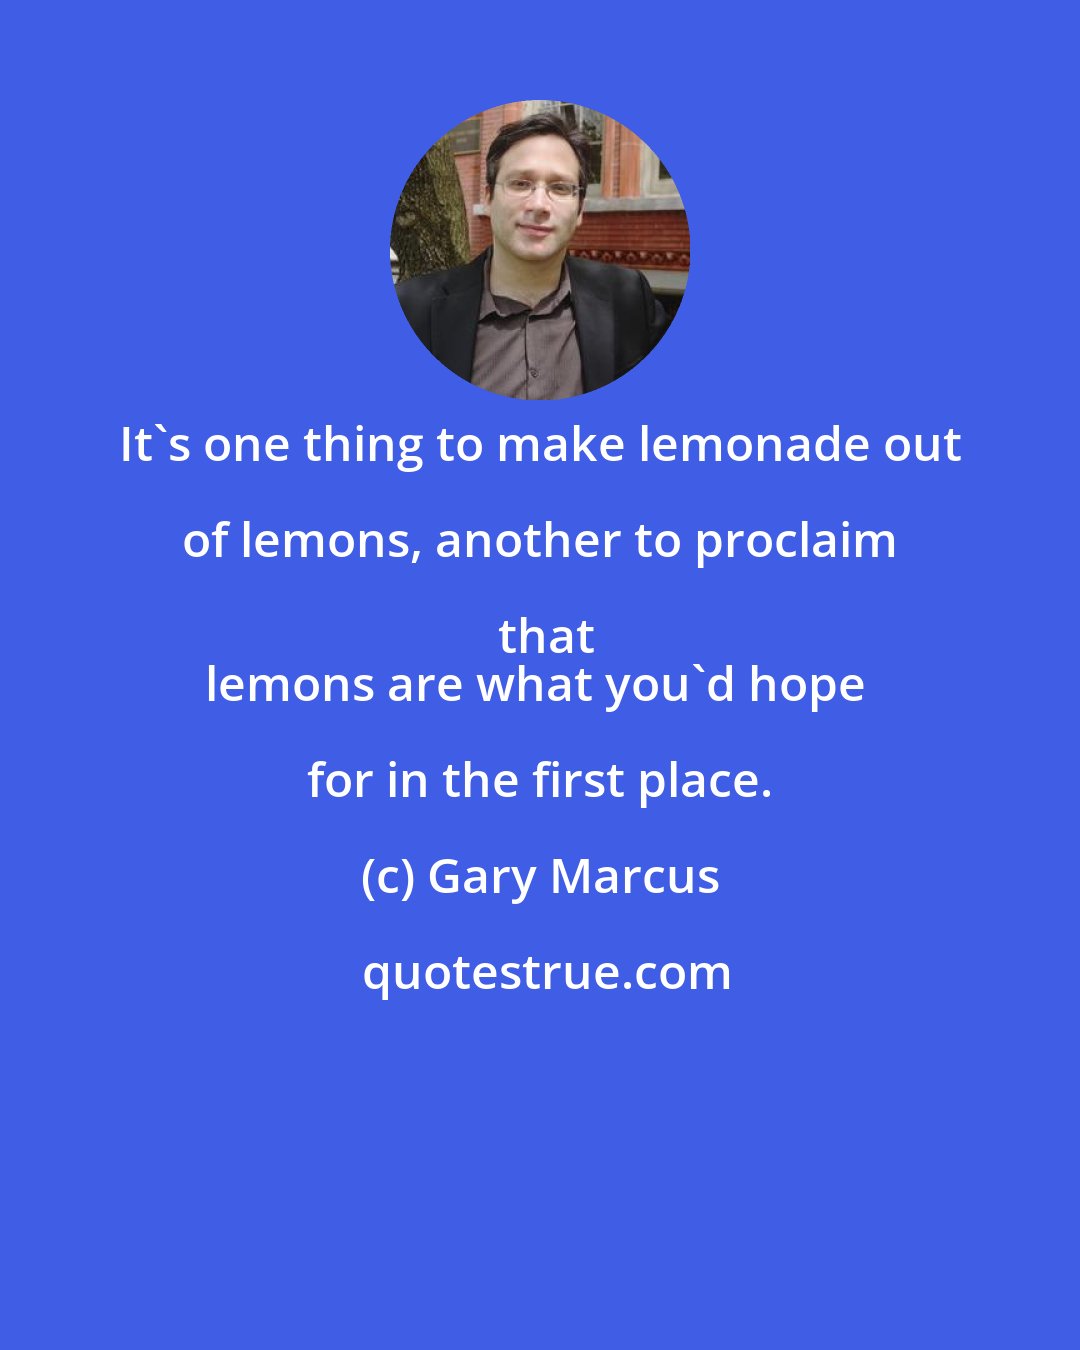 Gary Marcus: It's one thing to make lemonade out of lemons, another to proclaim that
lemons are what you'd hope for in the first place.